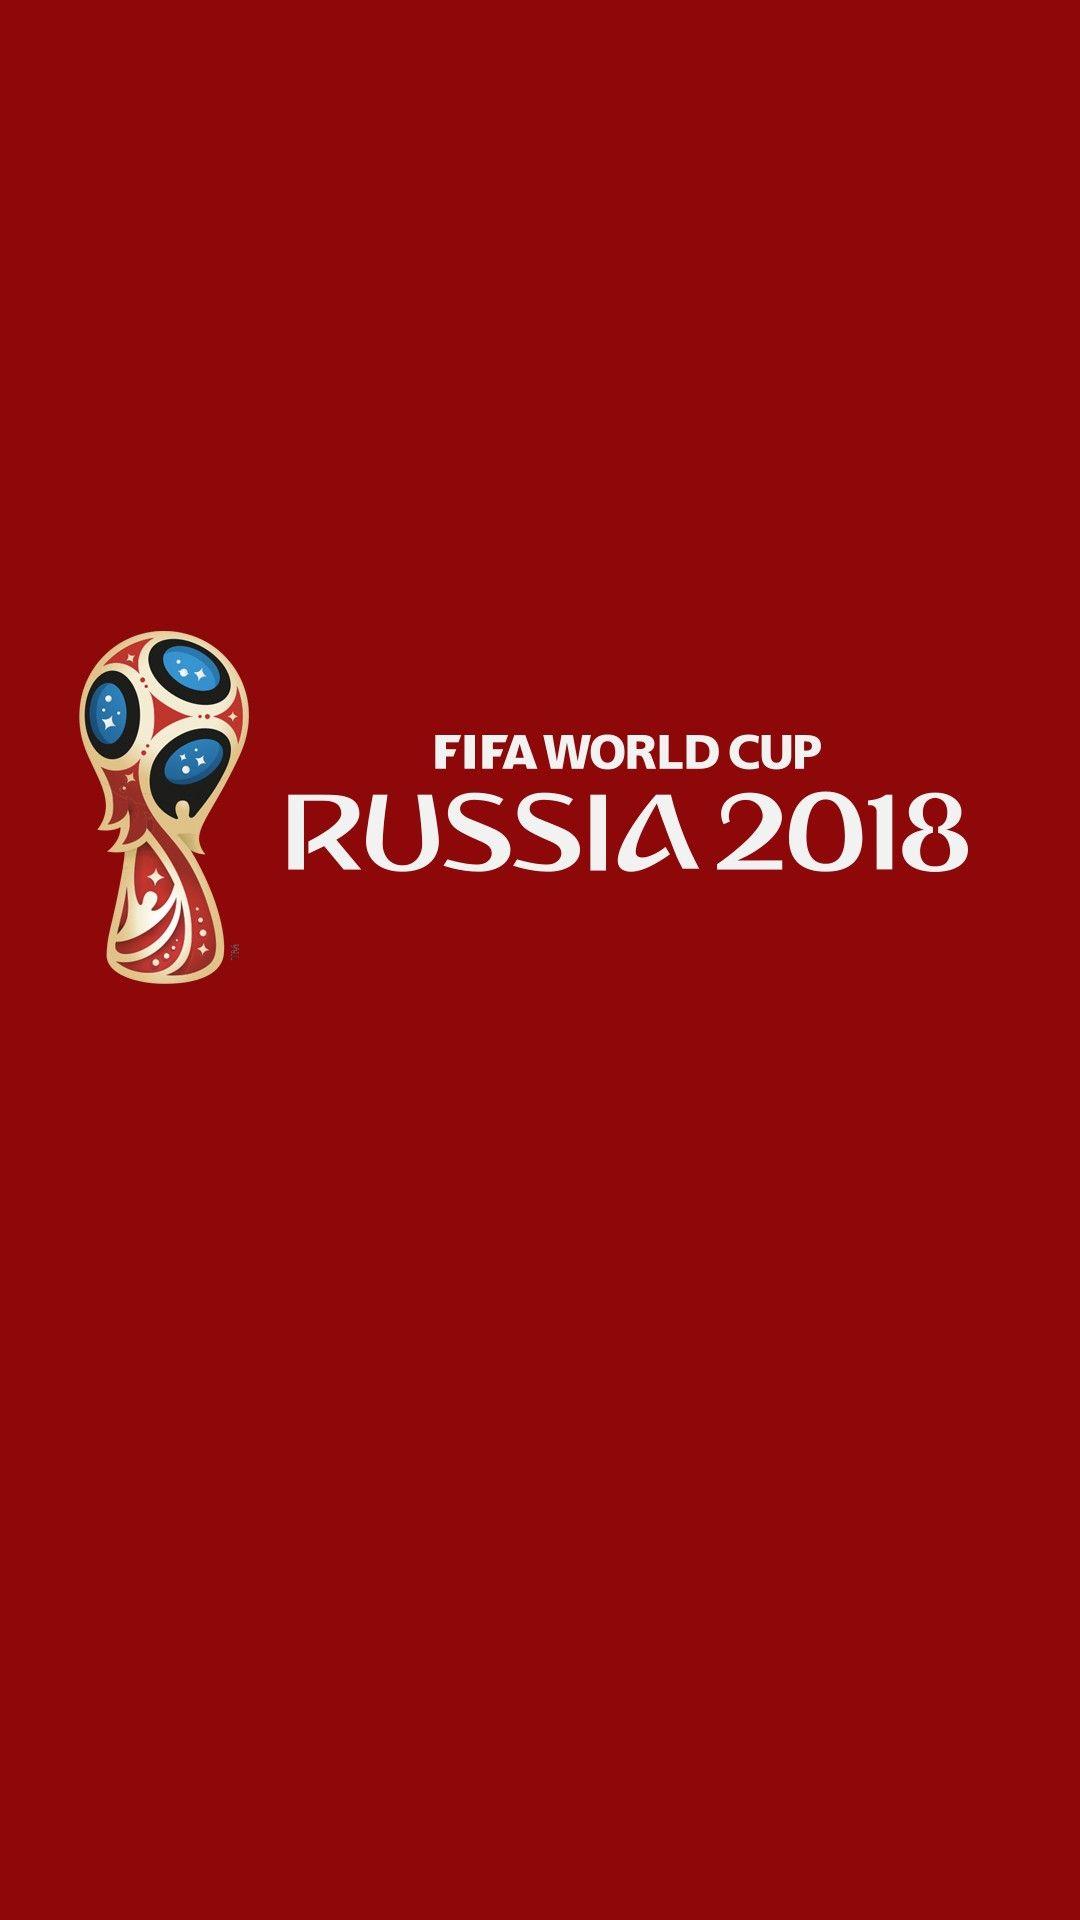 iPhone 8 Wallpaper World Cup Russia. I PAD. World cup, Fifa world